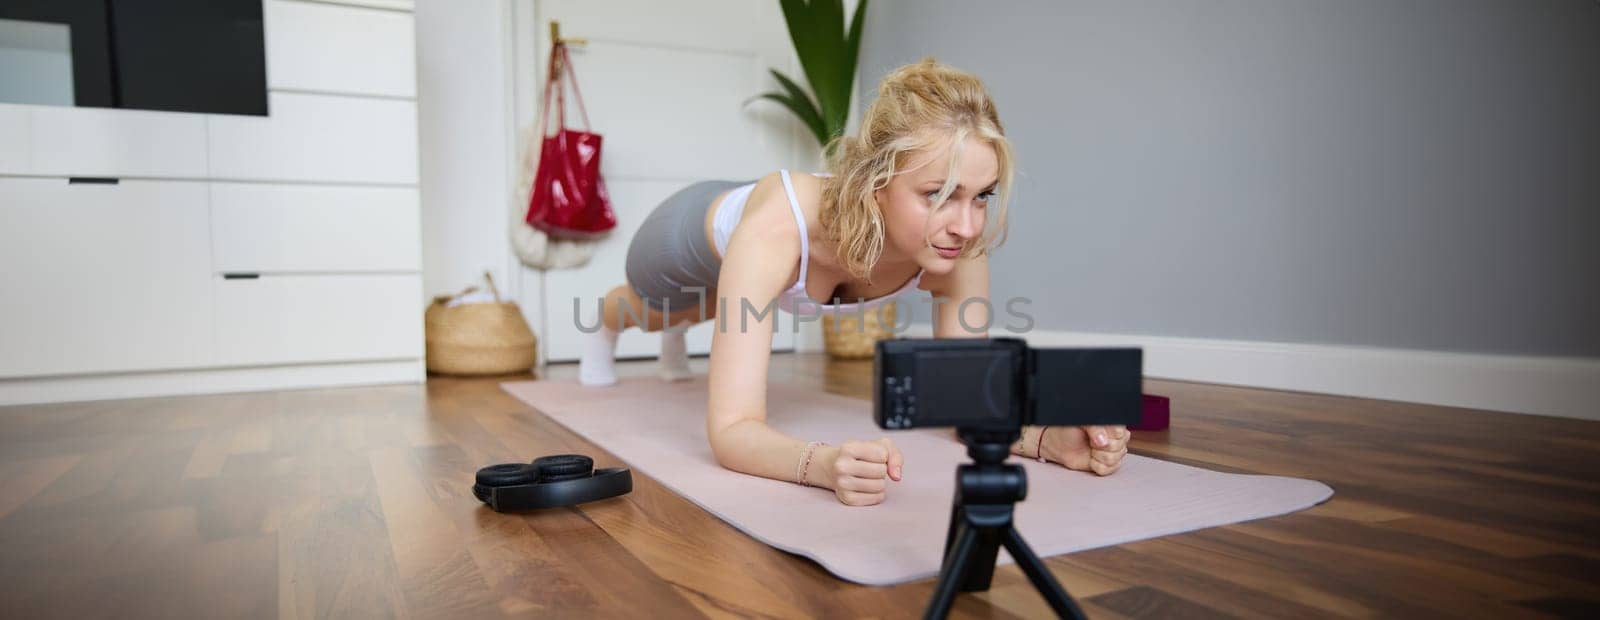 Young woman, personal fitness instructor records video of herself standing in a plank, using rubber yoga mat and digital camera at home.